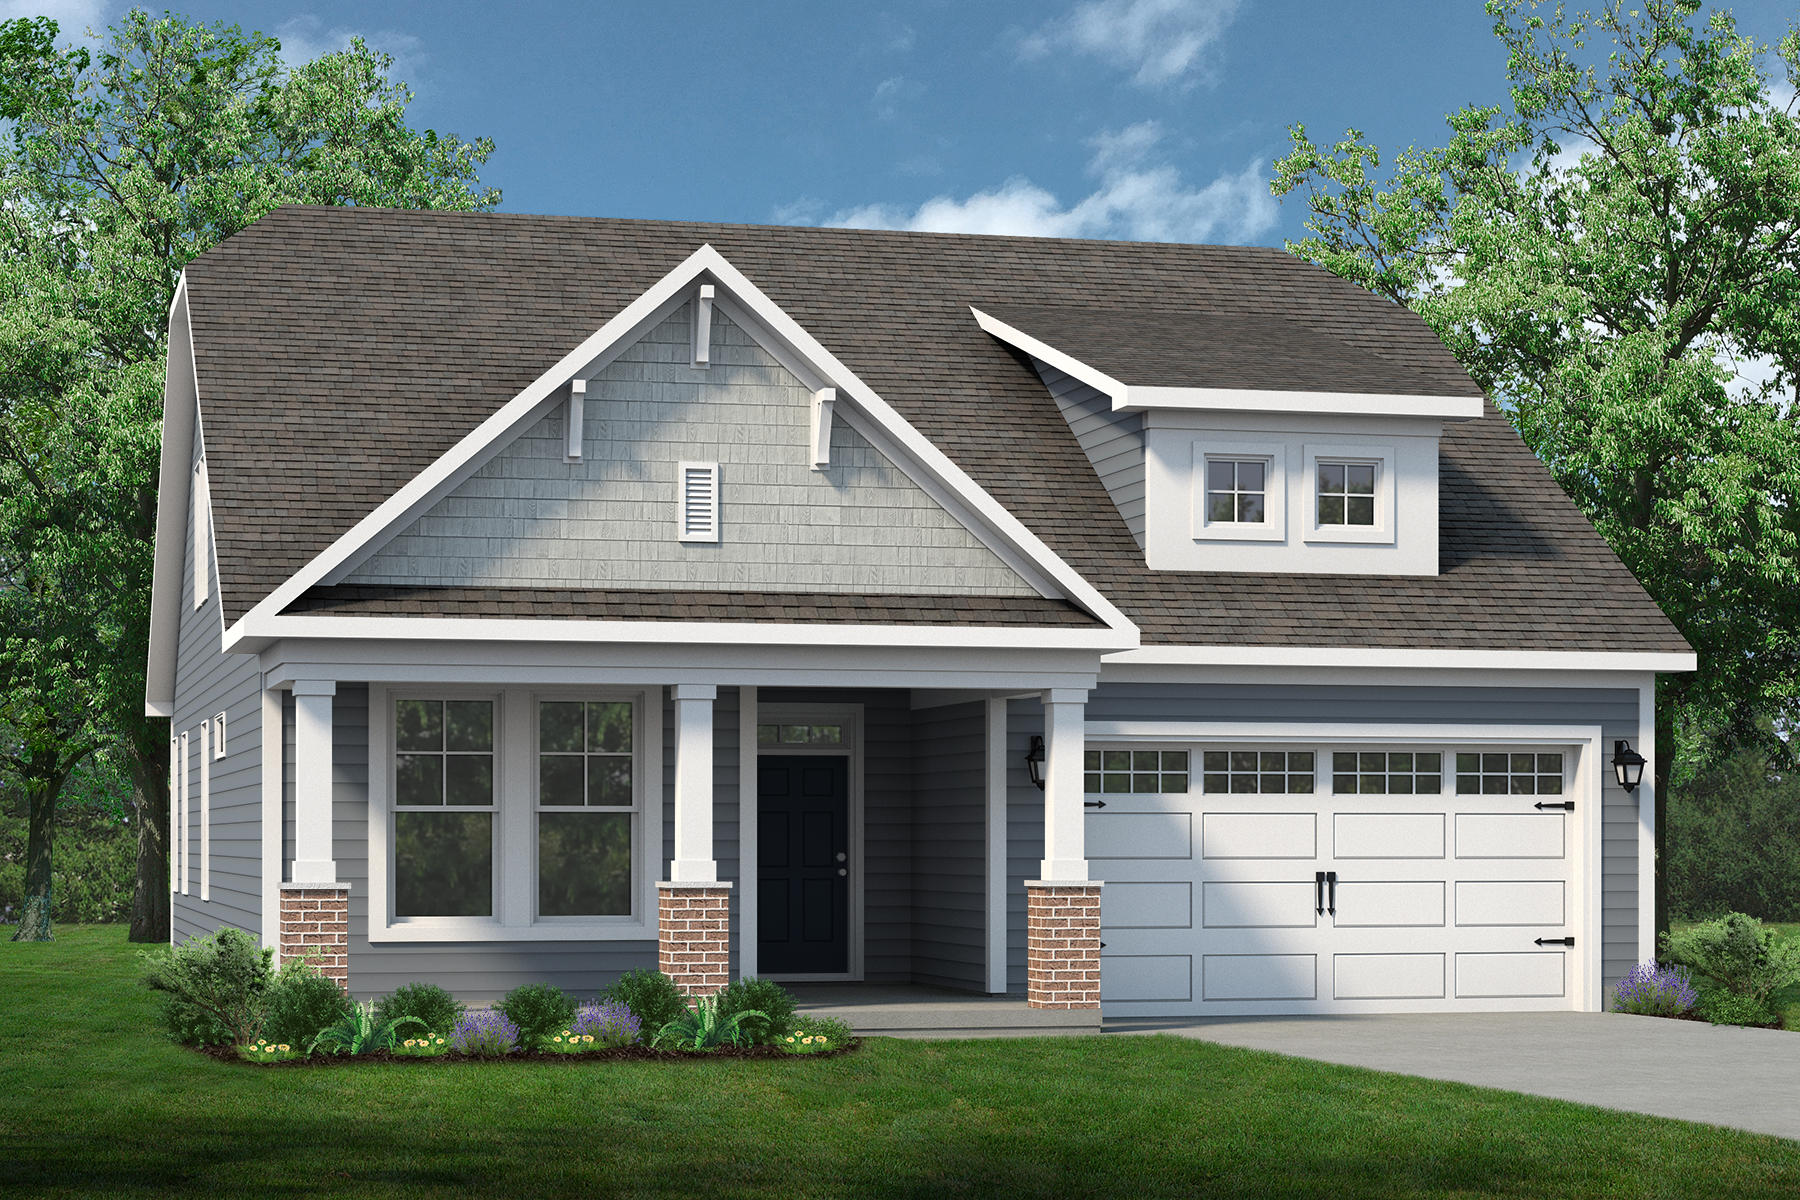 Elevation D. 1,938sf New Home in Bolivia, NC